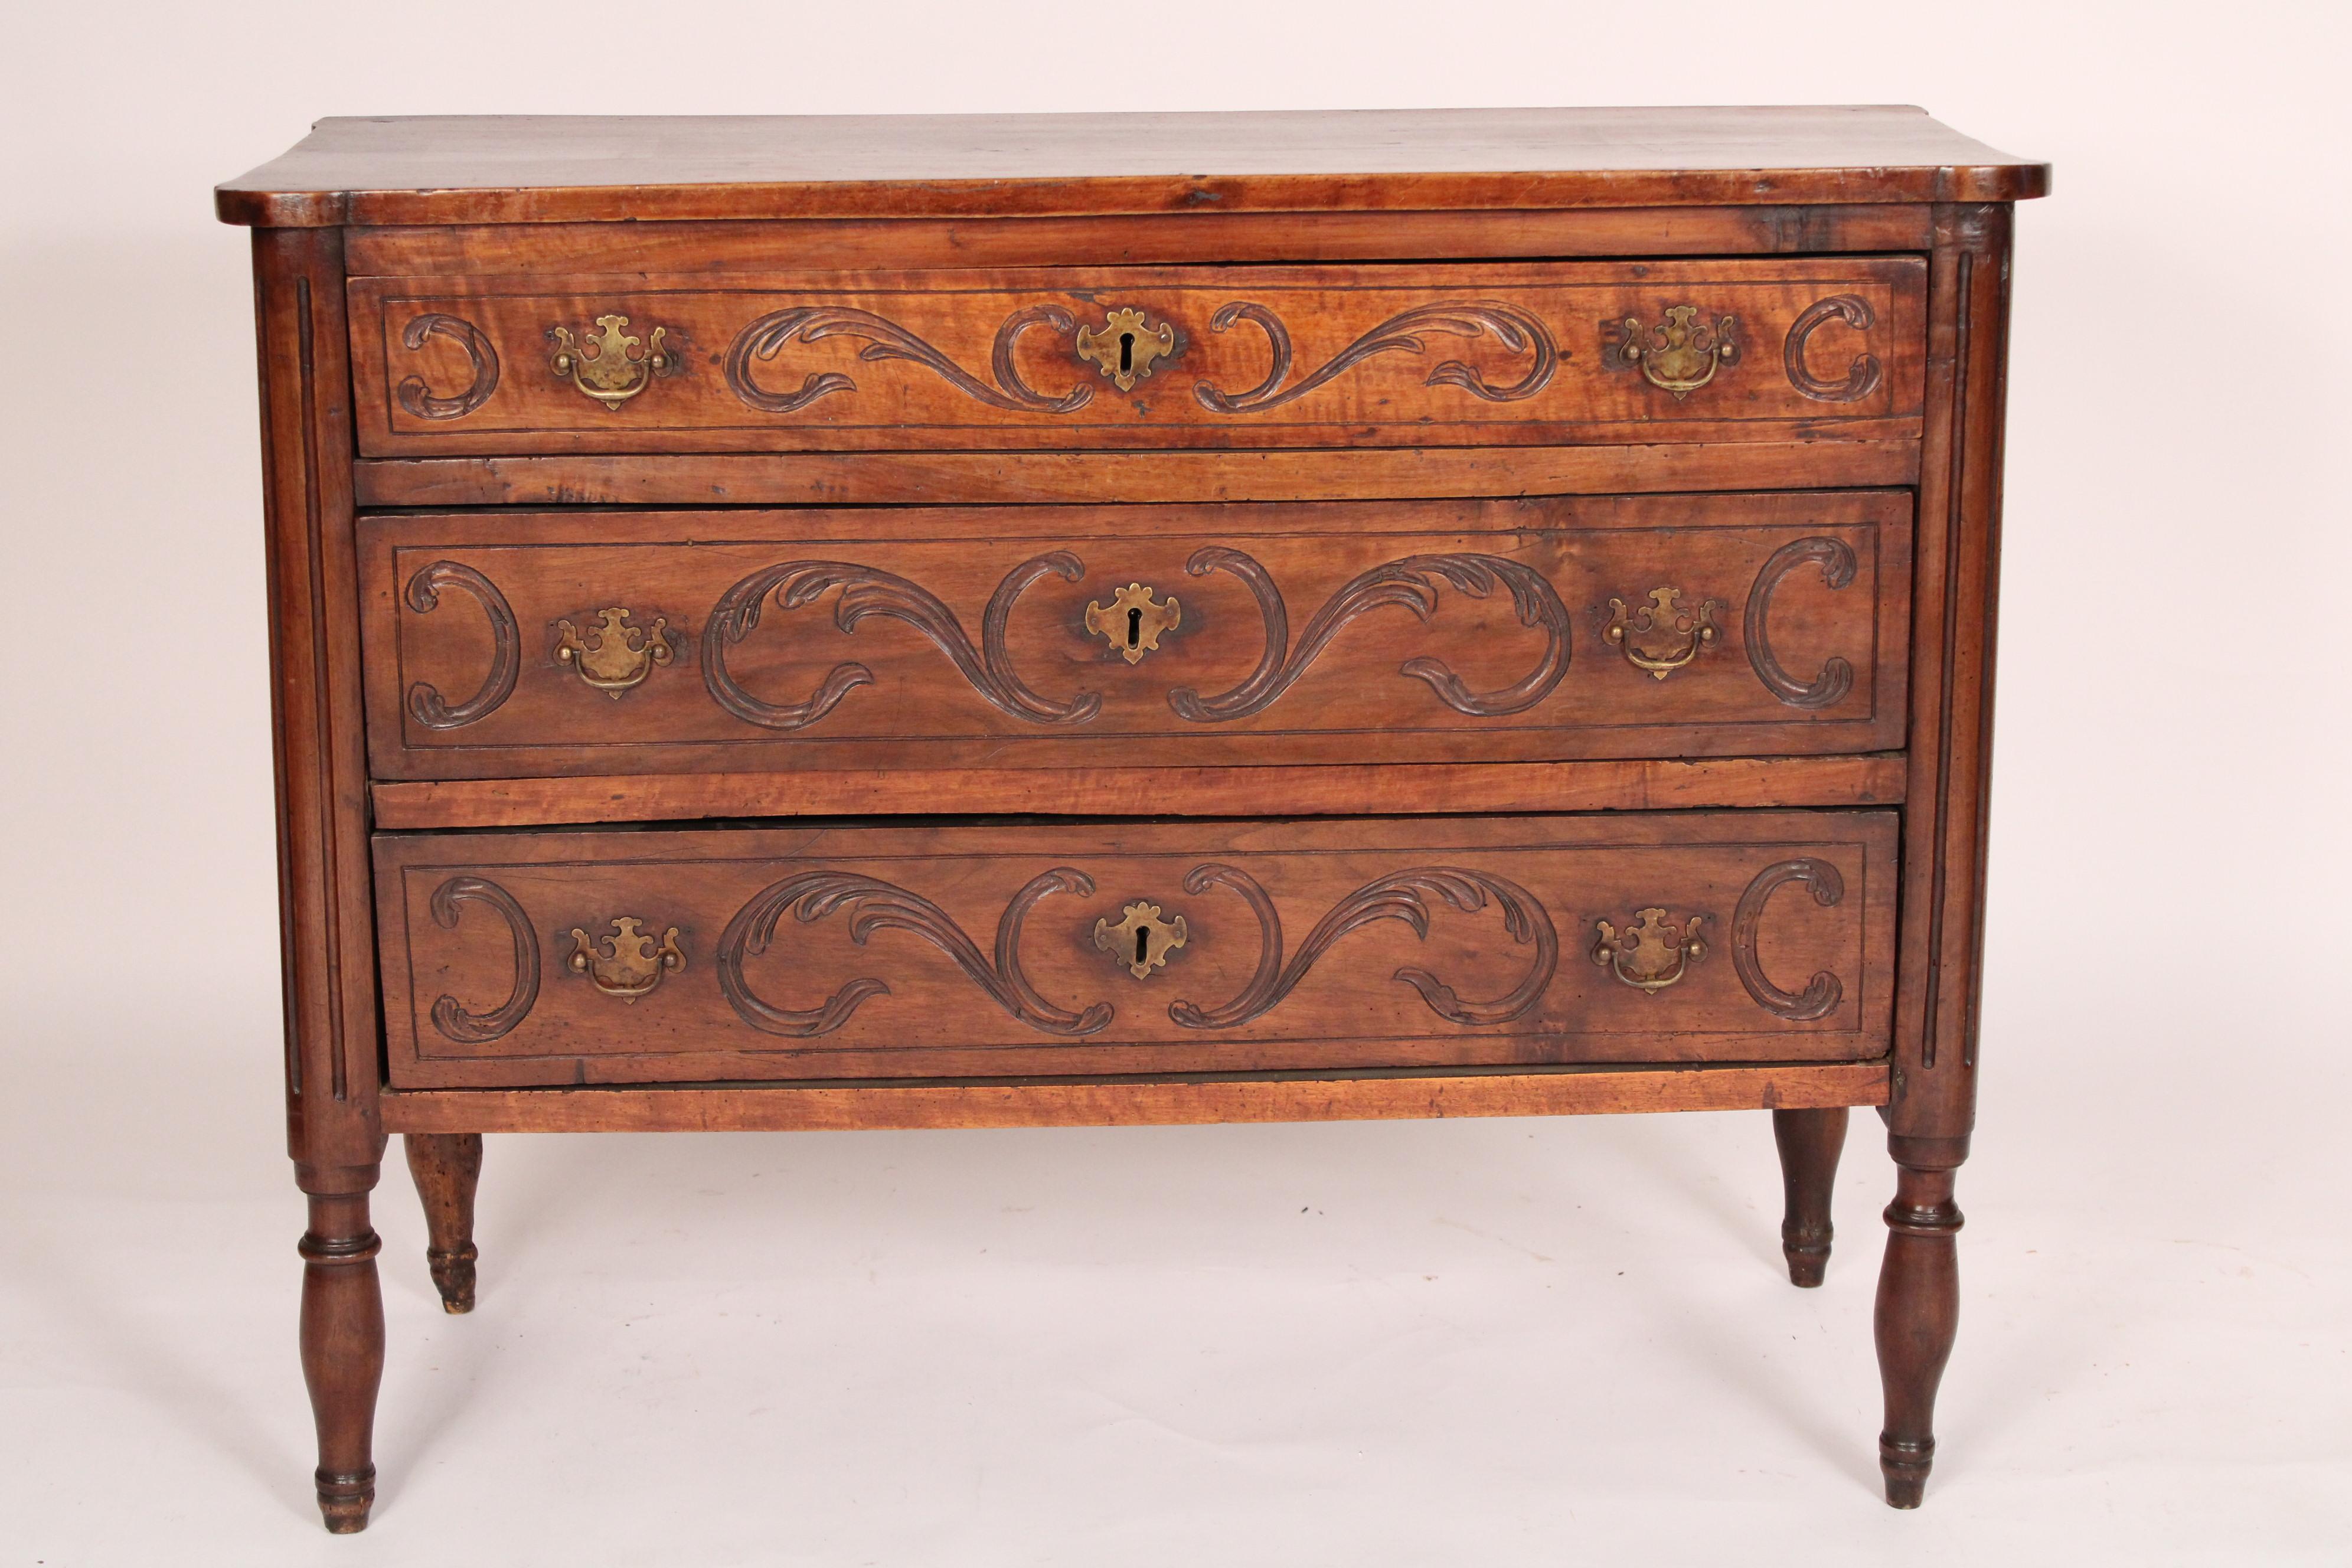 Antique Louis XVI style walnut chest of drawers, 19th century. With a single board walnut top with turret front corners, 3 walnut drawers each with incised designs, resting on turned legs. Hand dovetailed drawer construction.